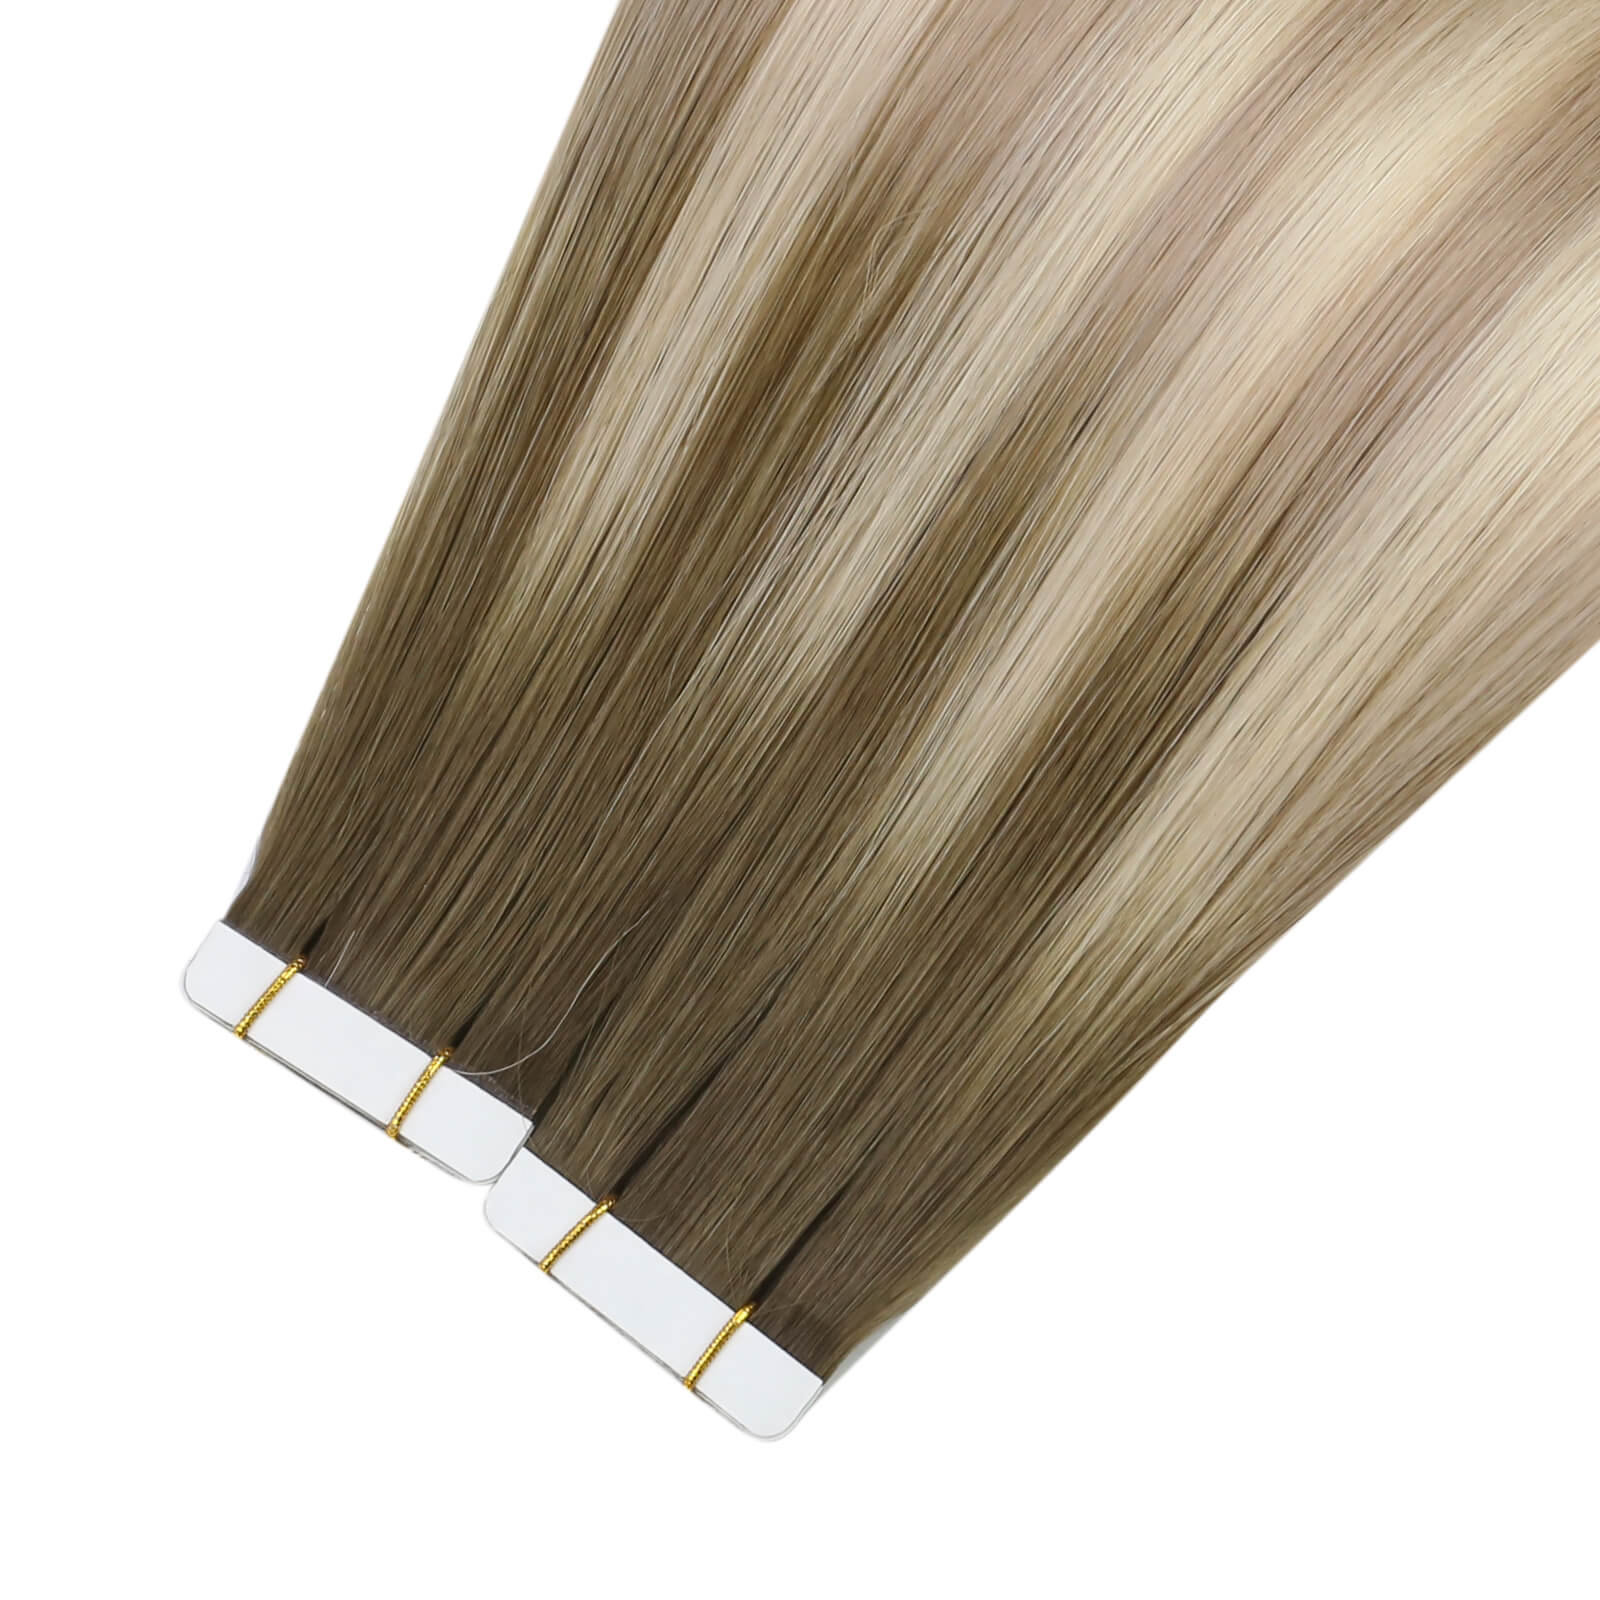 16 inch hair extensions permanent hair extensions invisible hair extensions for thin hair 